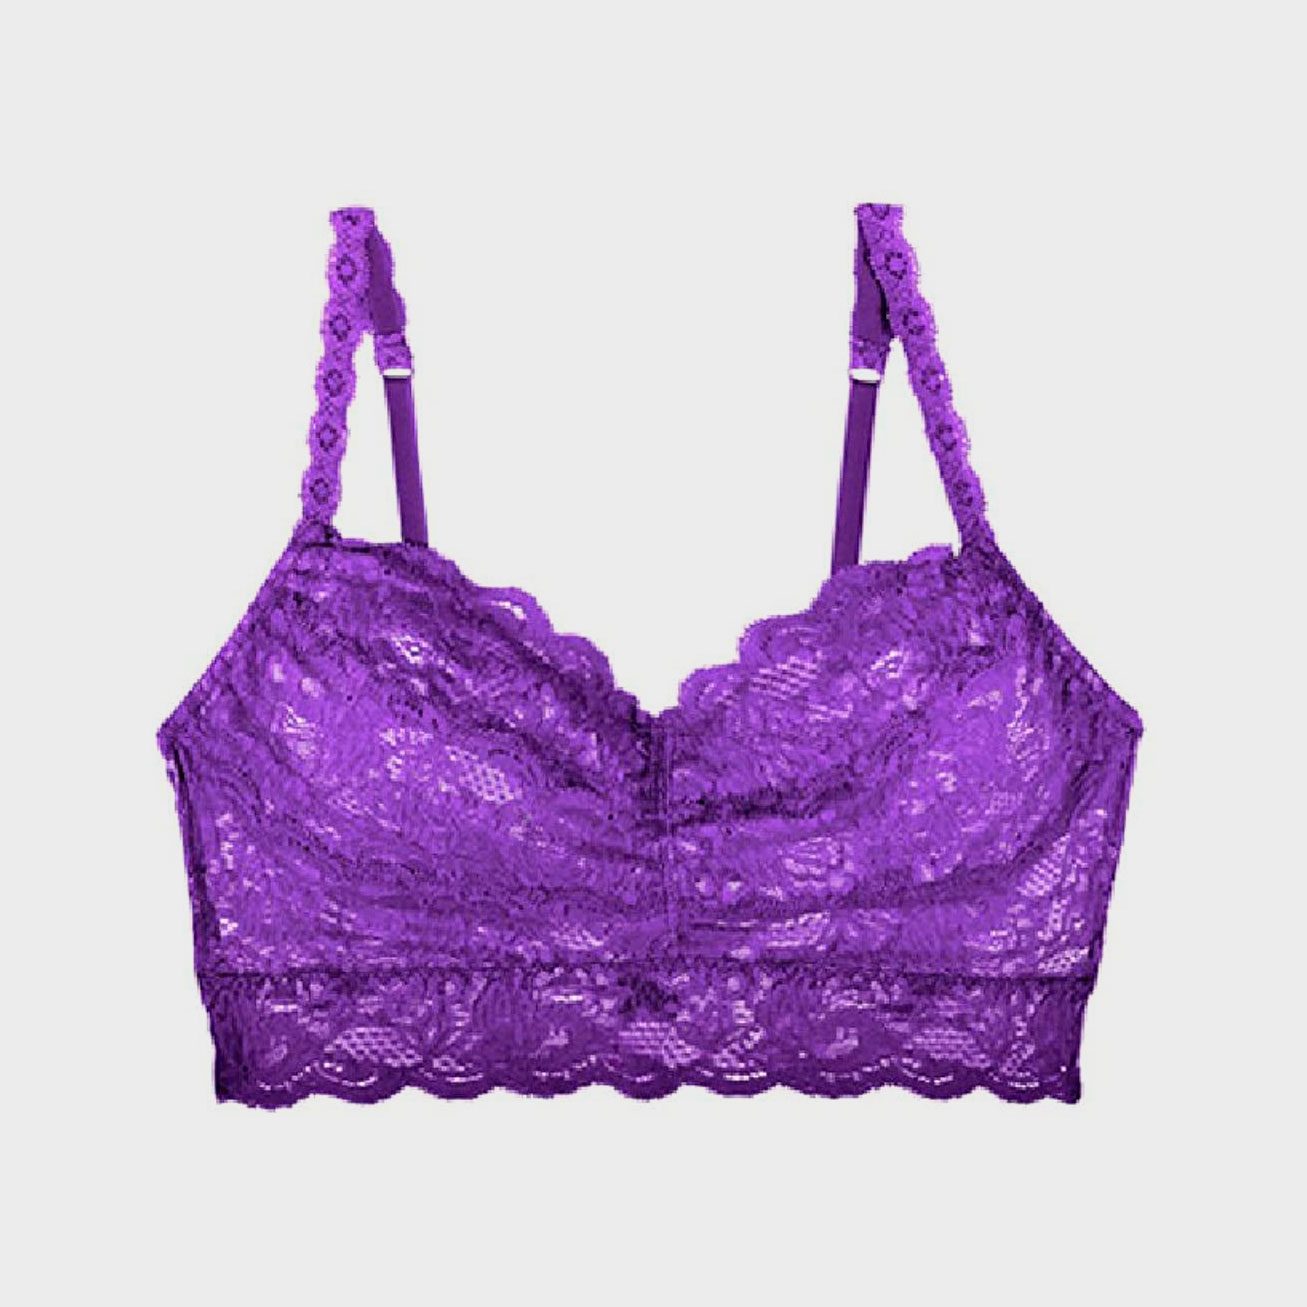 Breakout Bras - Did you know that Cosabella means